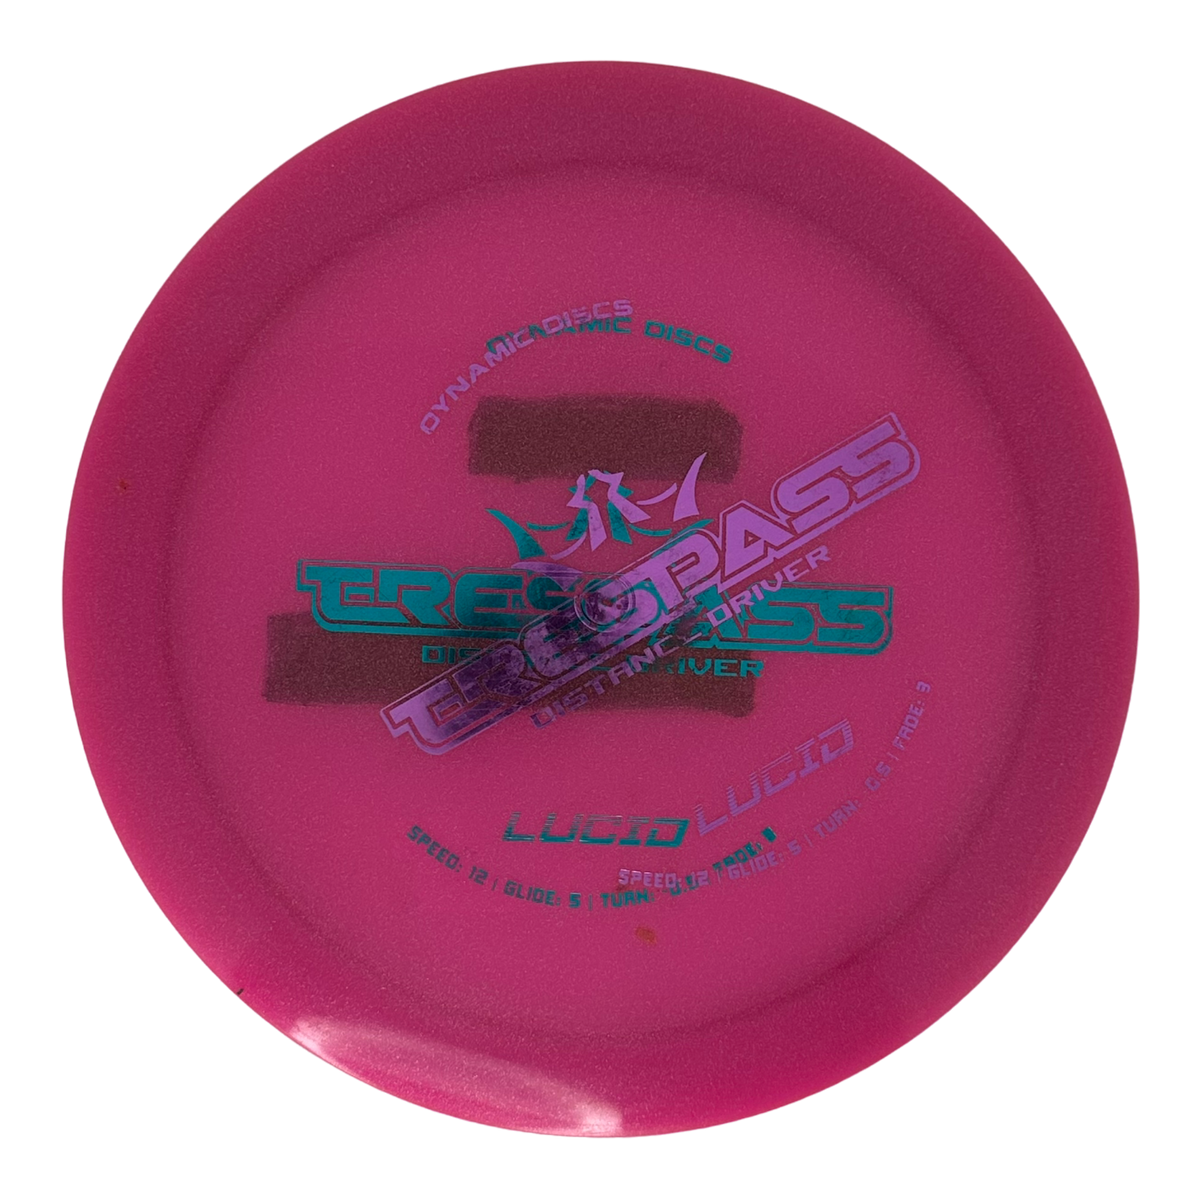 Dynamic Discs Pre-Owned Distance Drivers (Page 1)